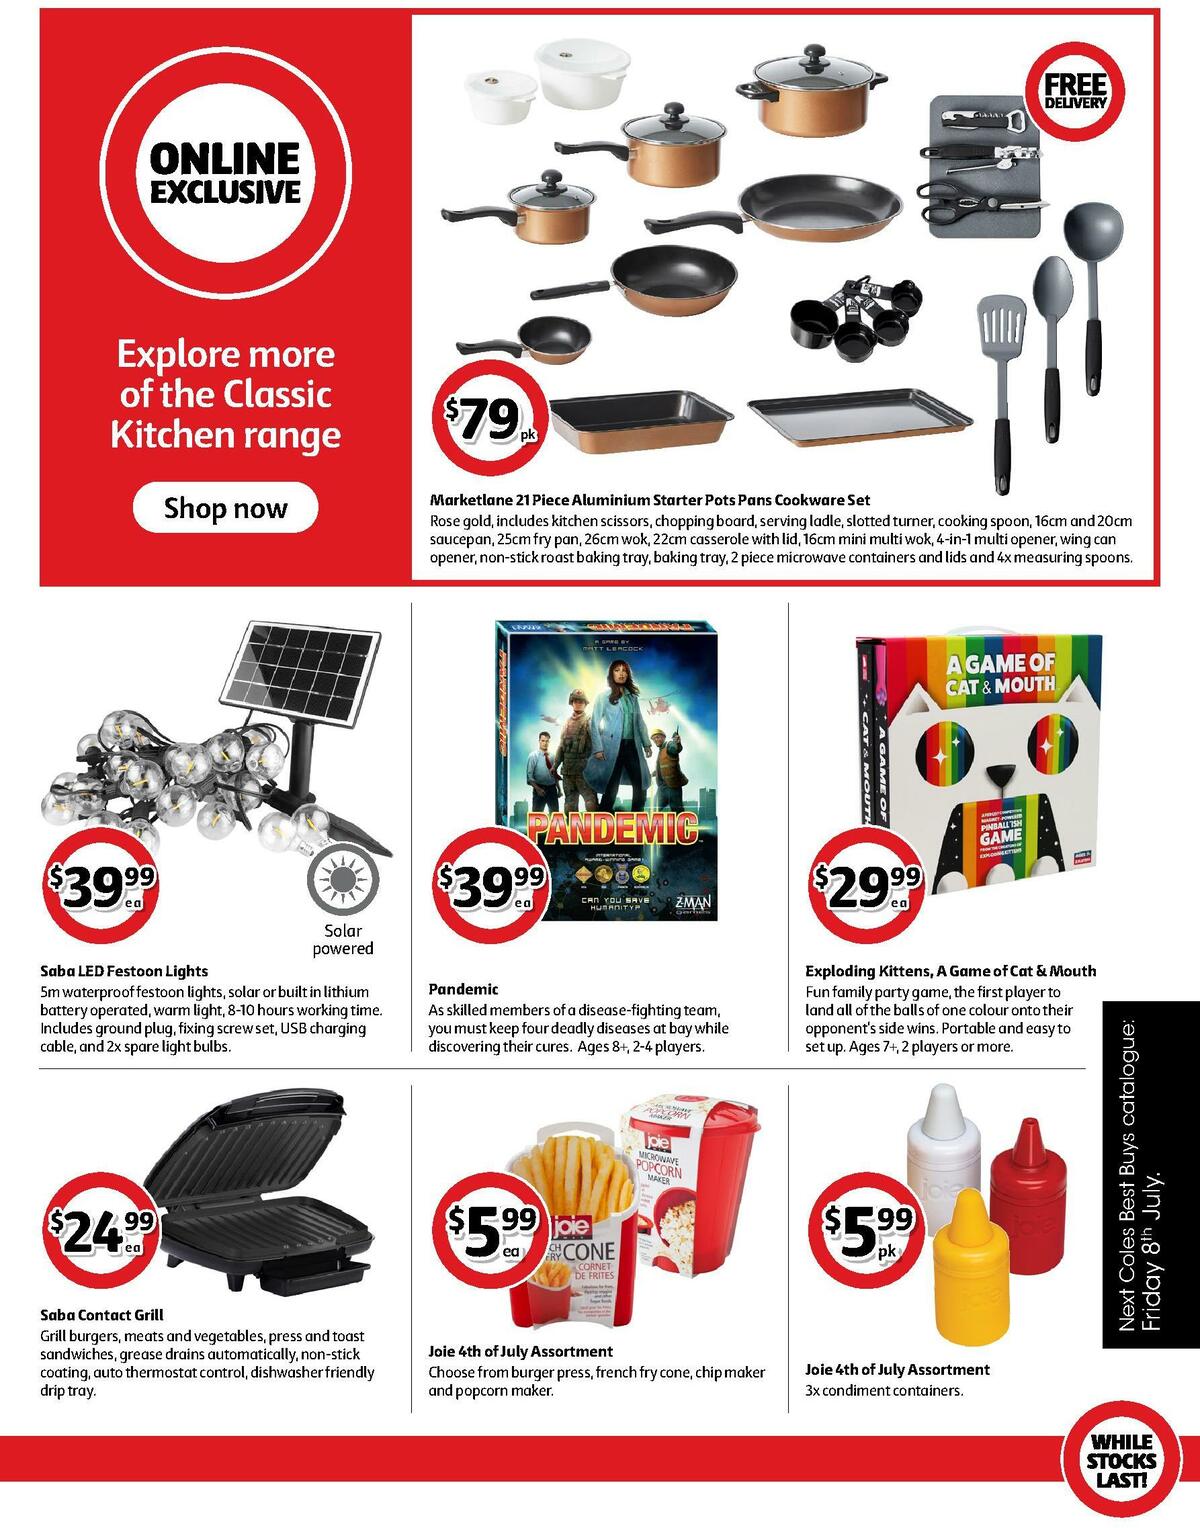 Coles Best Buys - Classic Kitchen Catalogues from 1 July